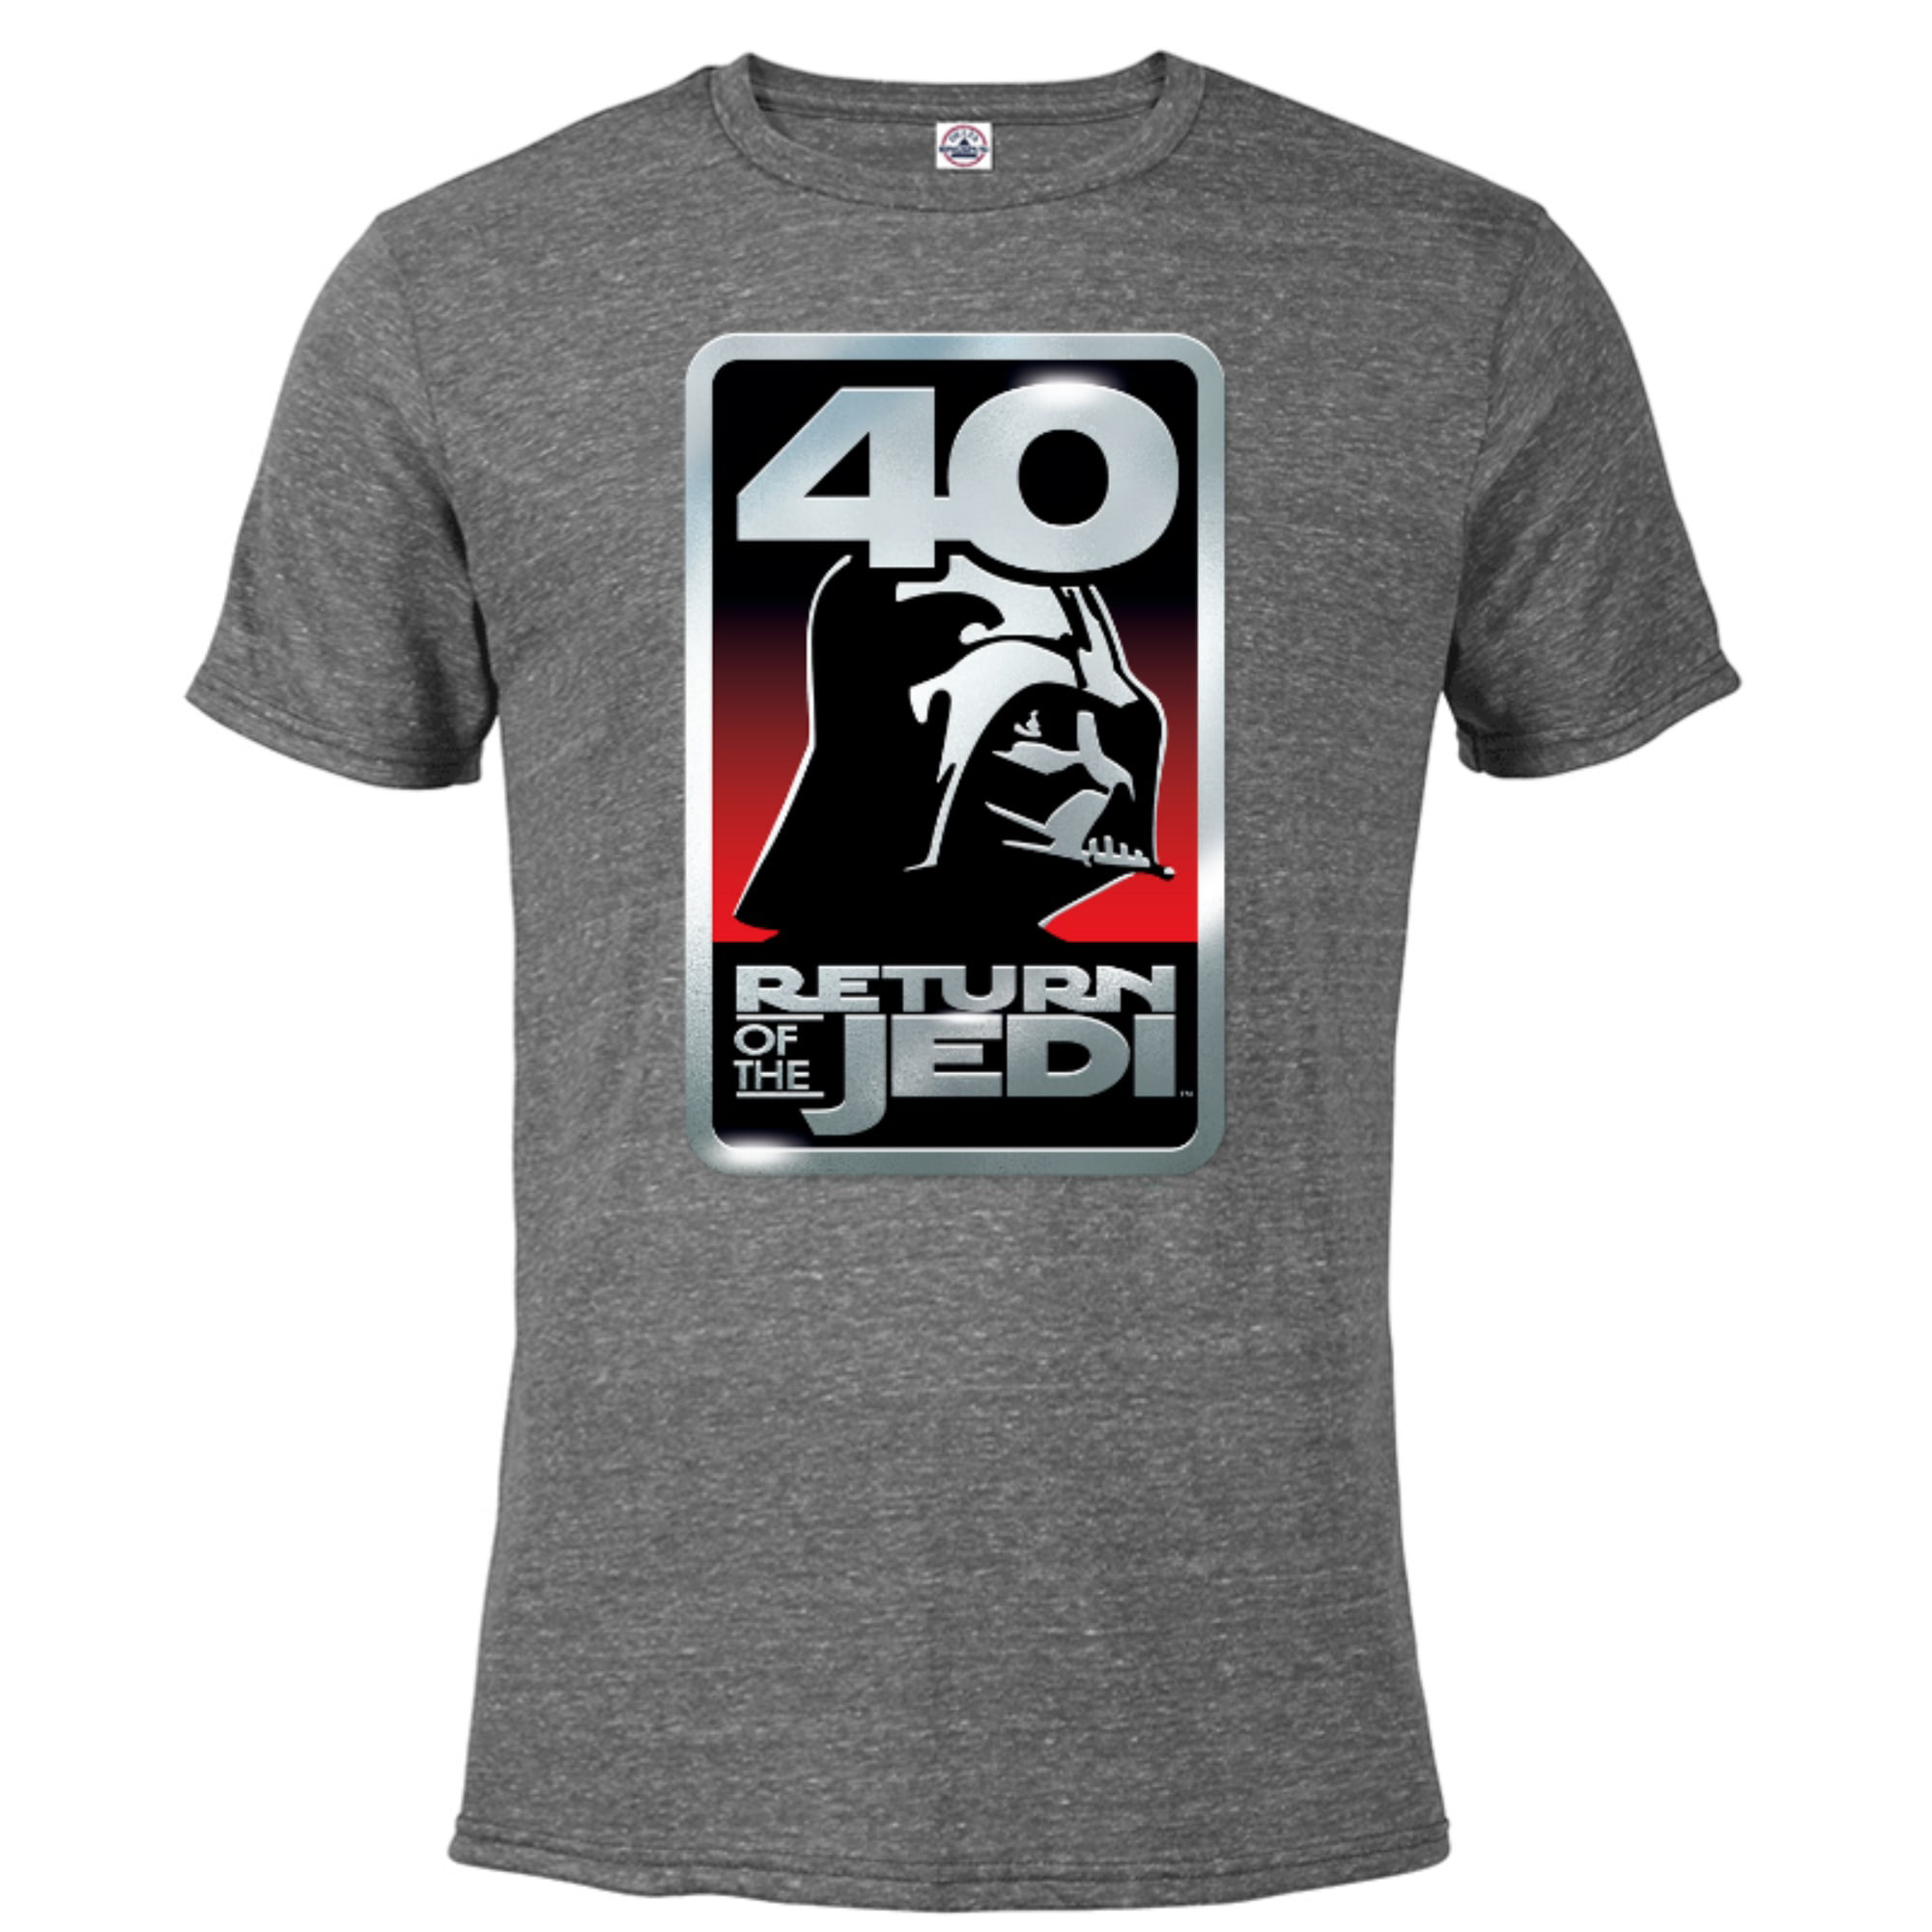 Star Wars Return of the Jedi Darth 40th Anniversary - Short Sleeve Blended T-Shirt for Adults - Customized-Graphite Snow Heather - Walmart.com